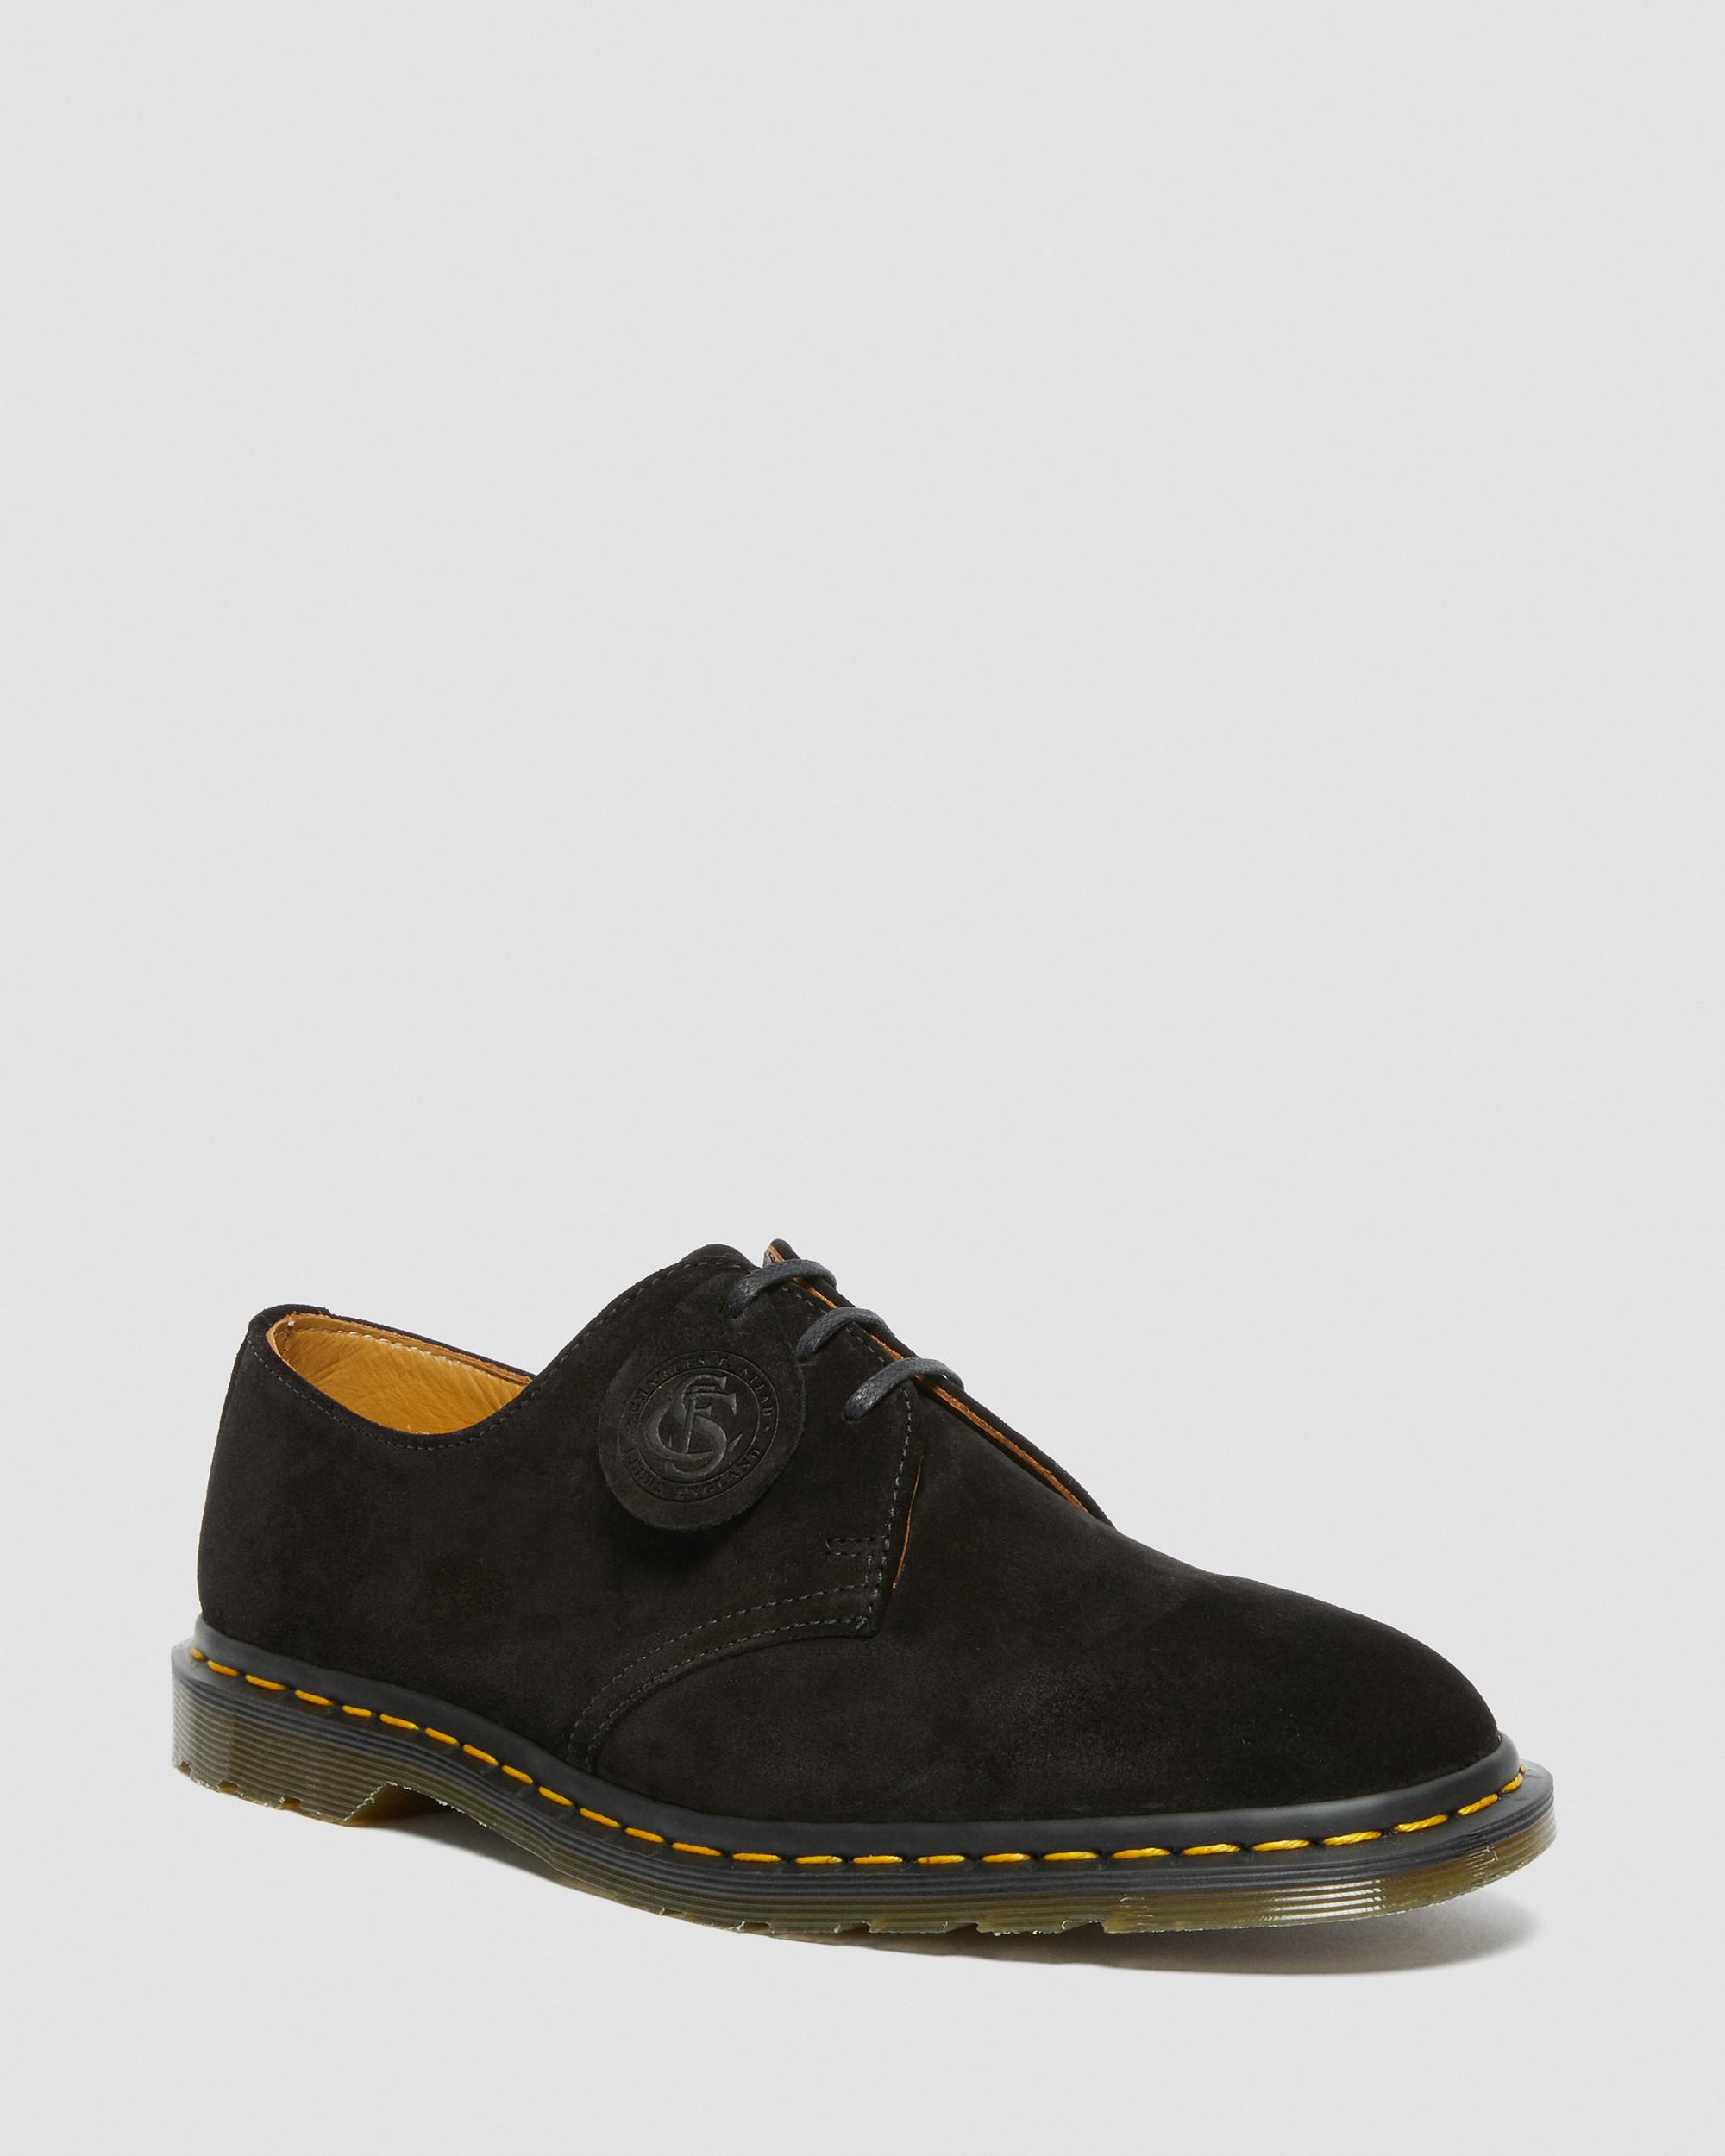 Archie II Made in England Suede Oxford Shoes in Black | Dr. Martens